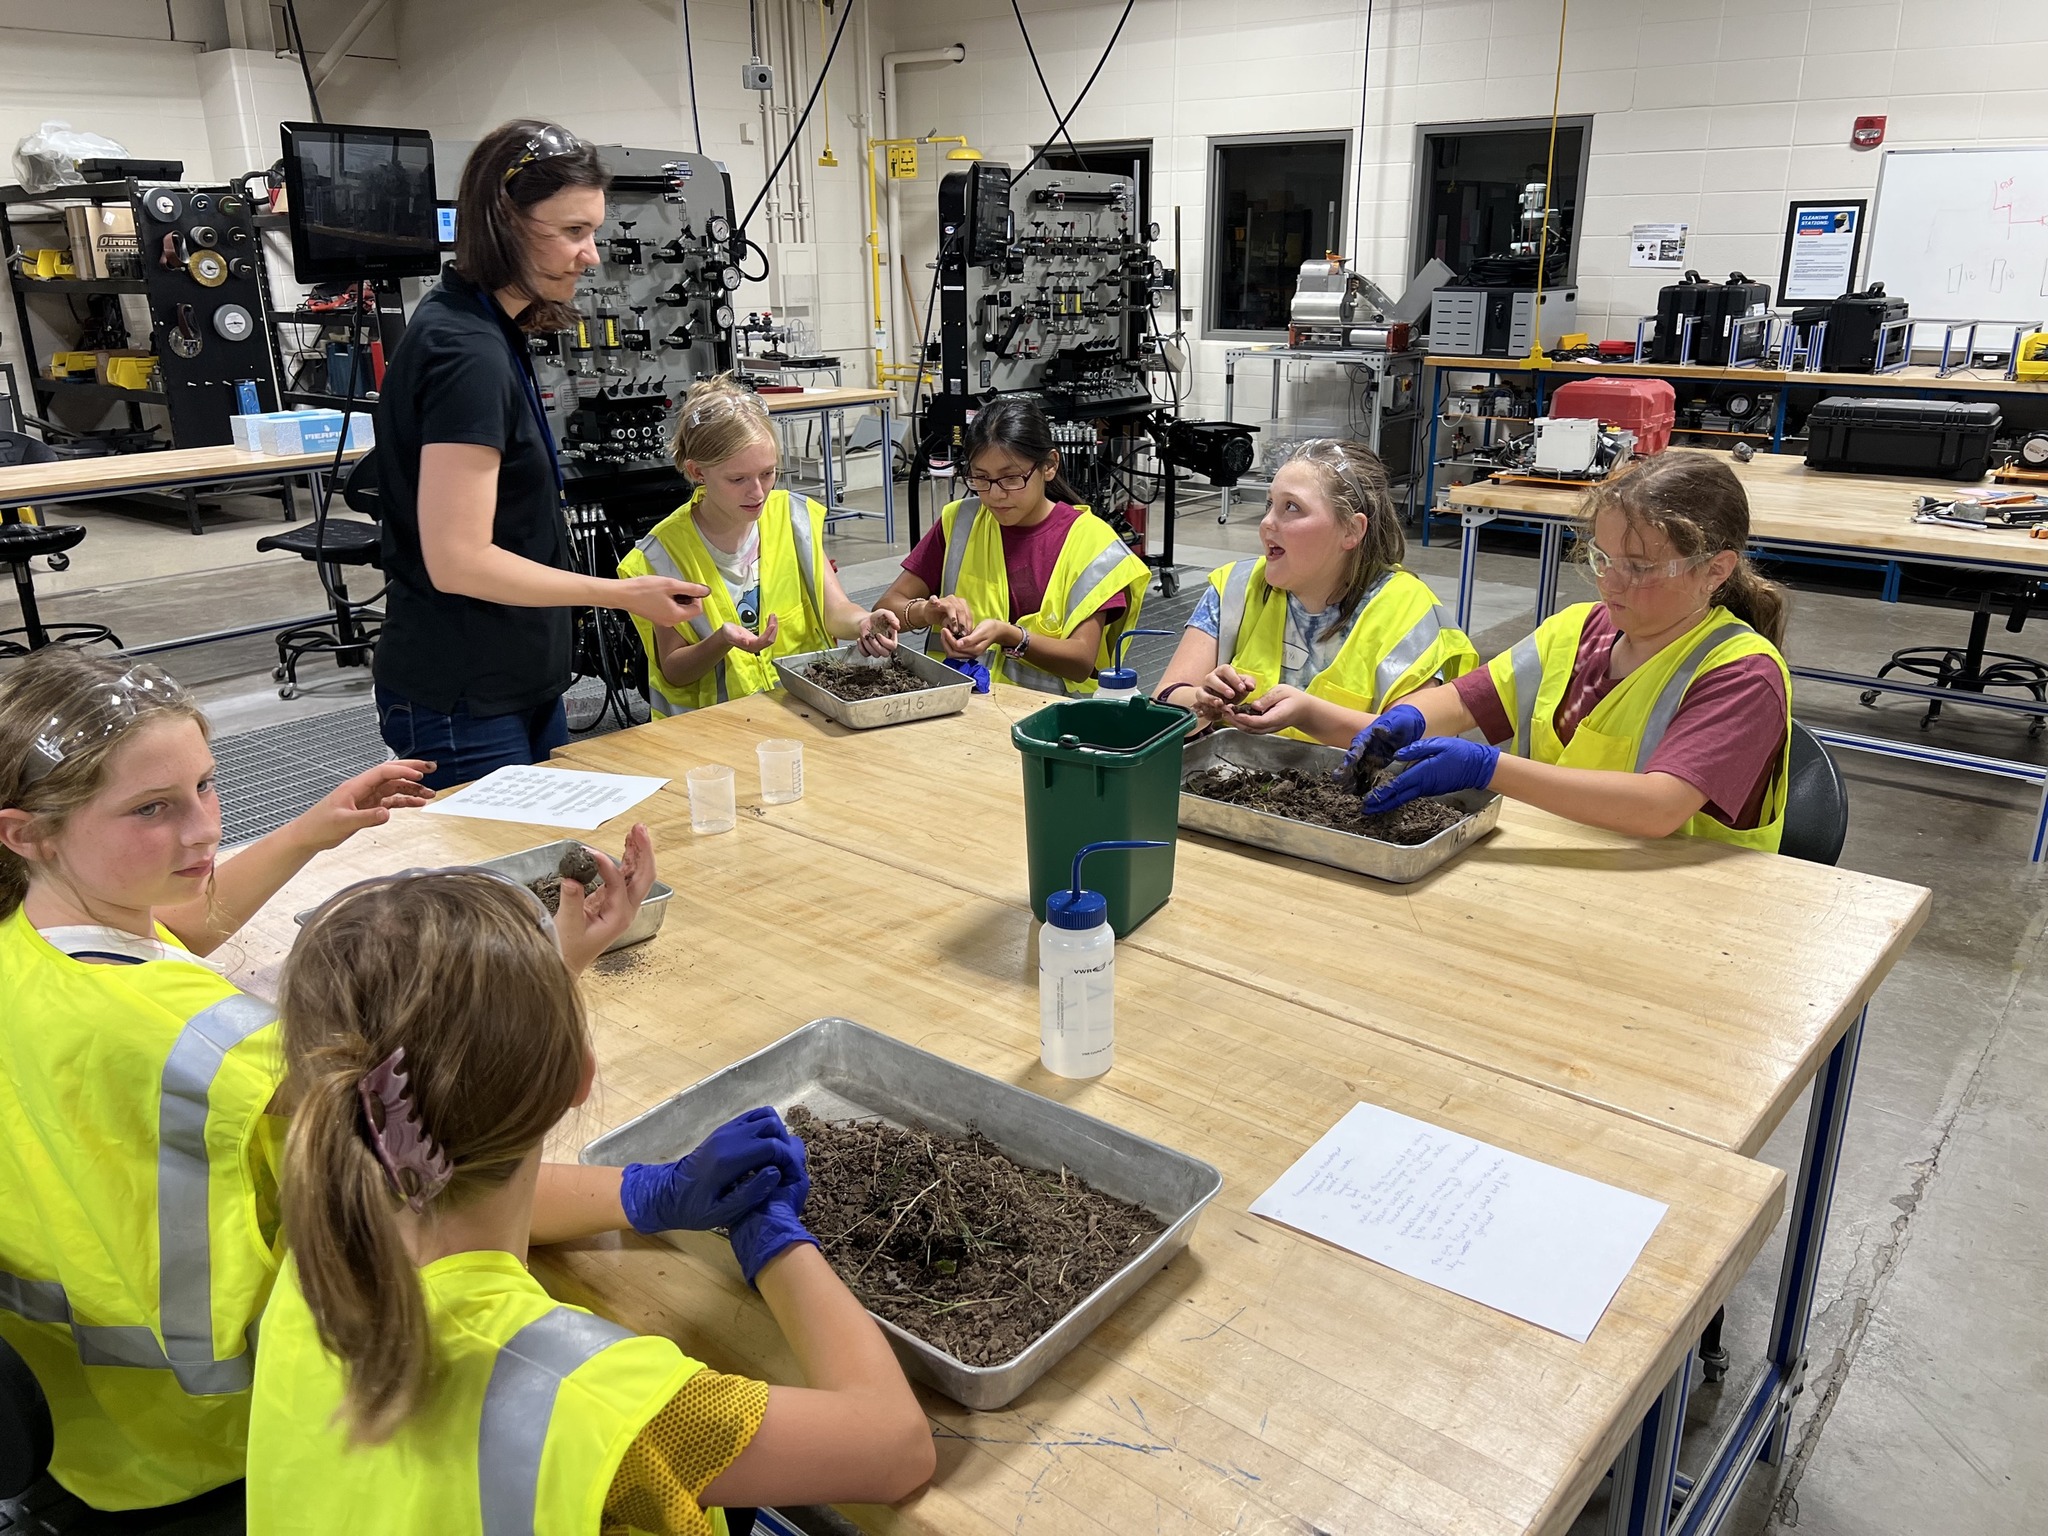 YWCA TechGYRLS get hands-on learning at NWTC